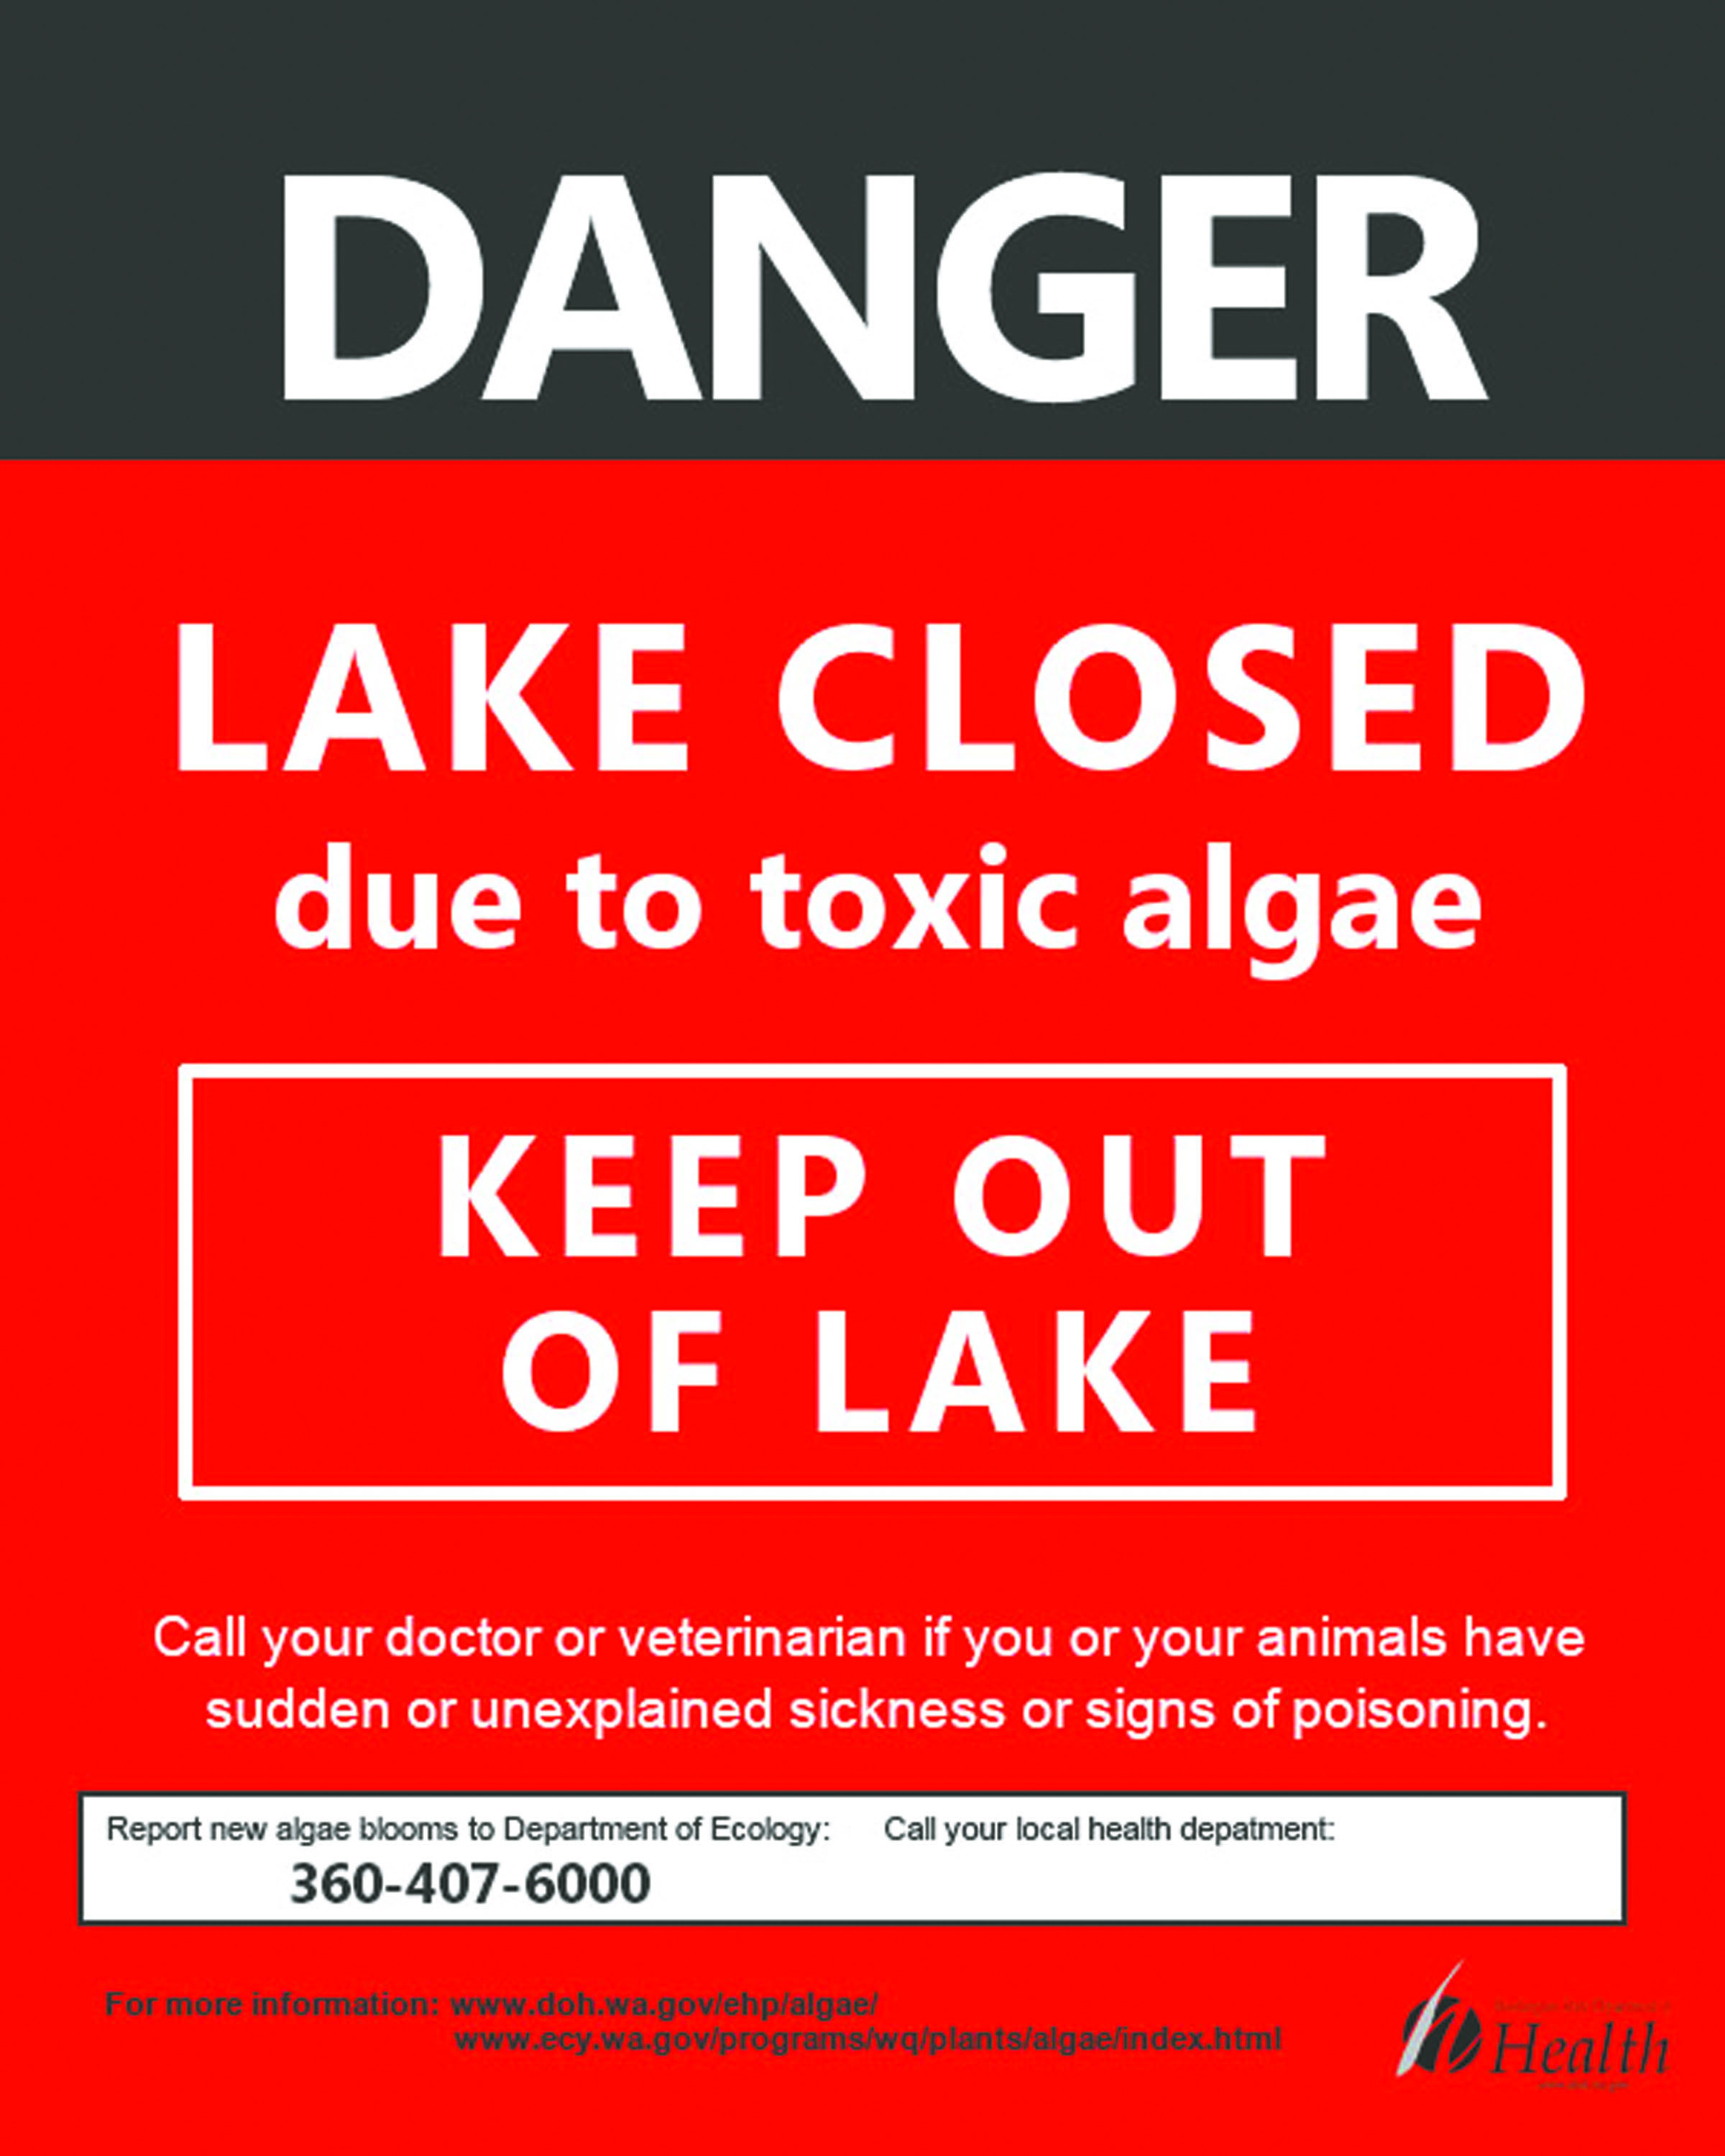 Anderson Lake south of Port Townsend closed because toxins 990 times over safe level; state park still open